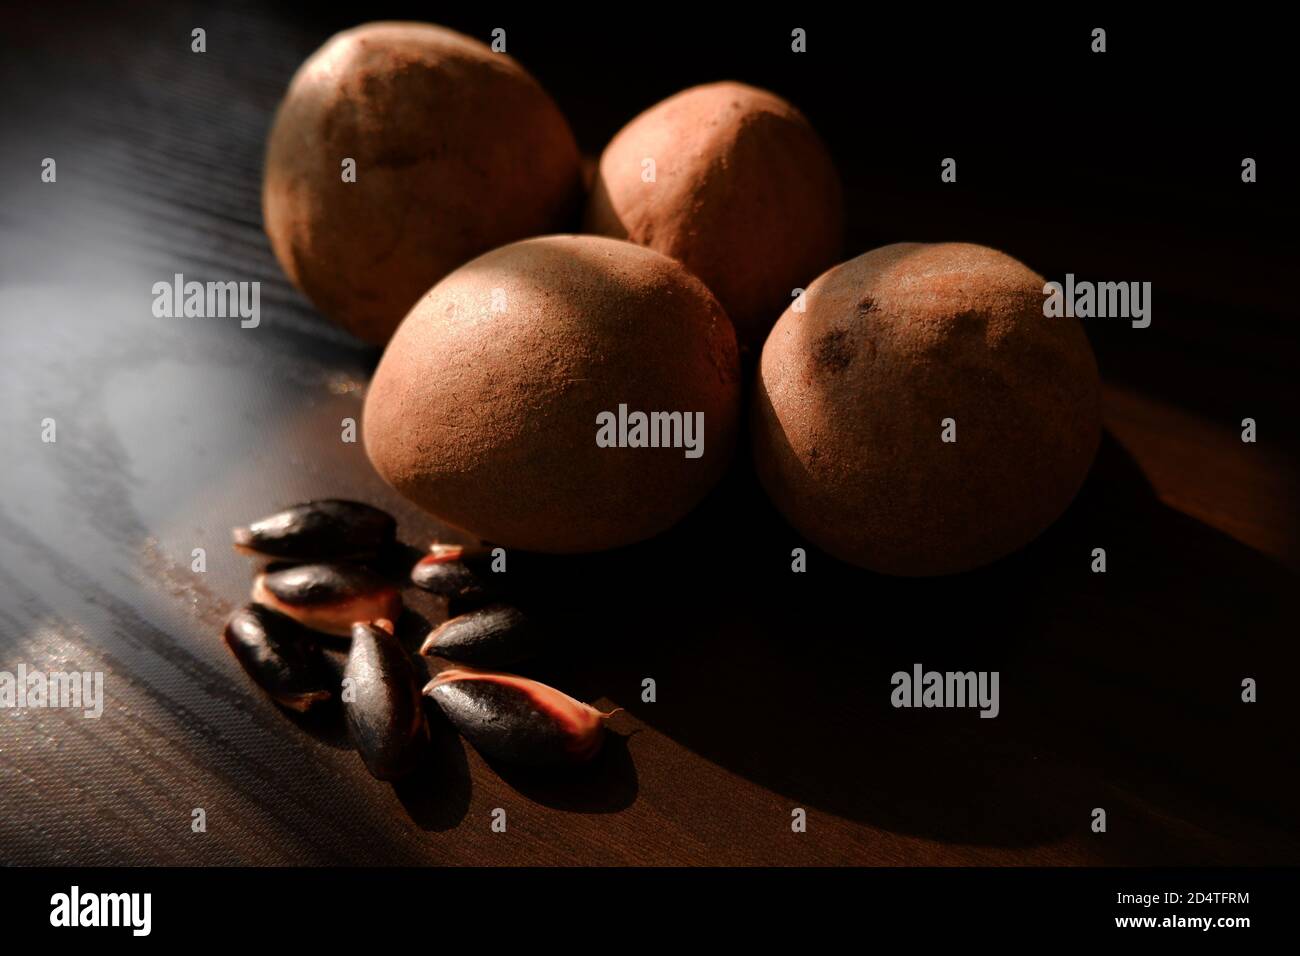 a close shot of sapota (Chikoo) fruits & seeds isolated on brown wooden background Stock Photo